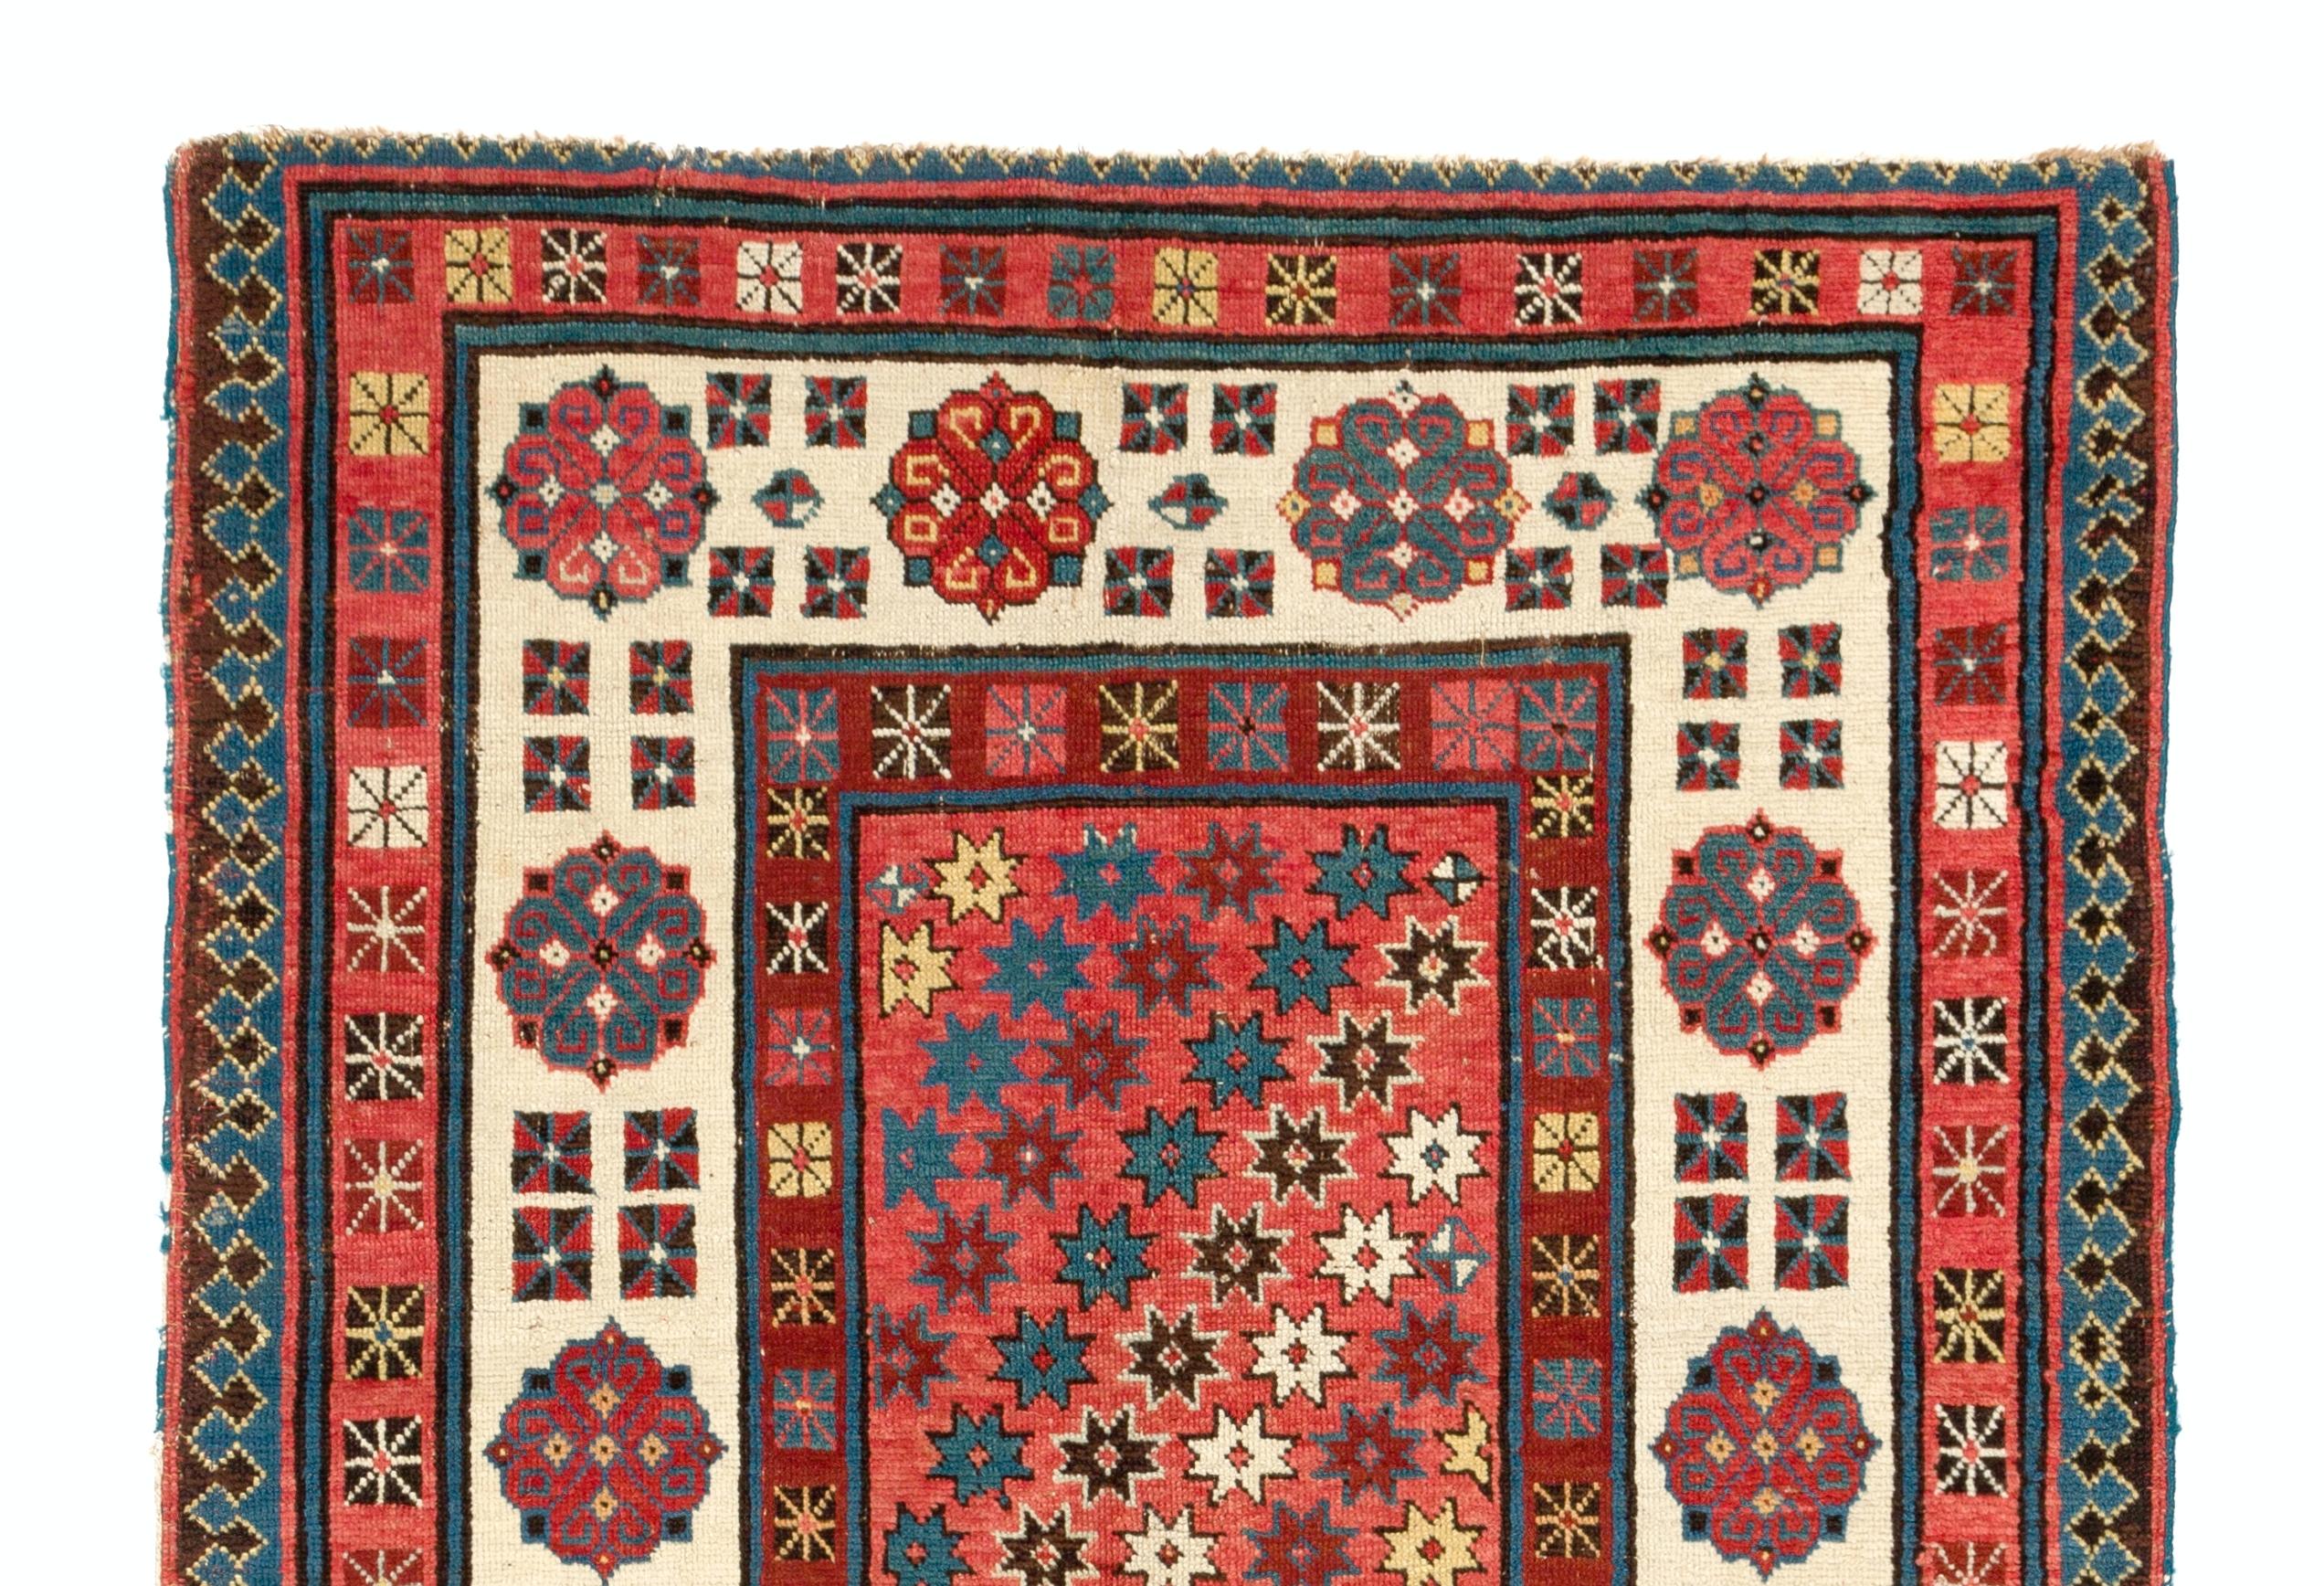 A classical antique Talish long rug from the Caspian coast of South East Caucasus. Ca 1860. Size: 3.3x7.2 ft.
Talish rugs are named after the tribe that live in this territory and weave rugs with this distinctive style and design that generally